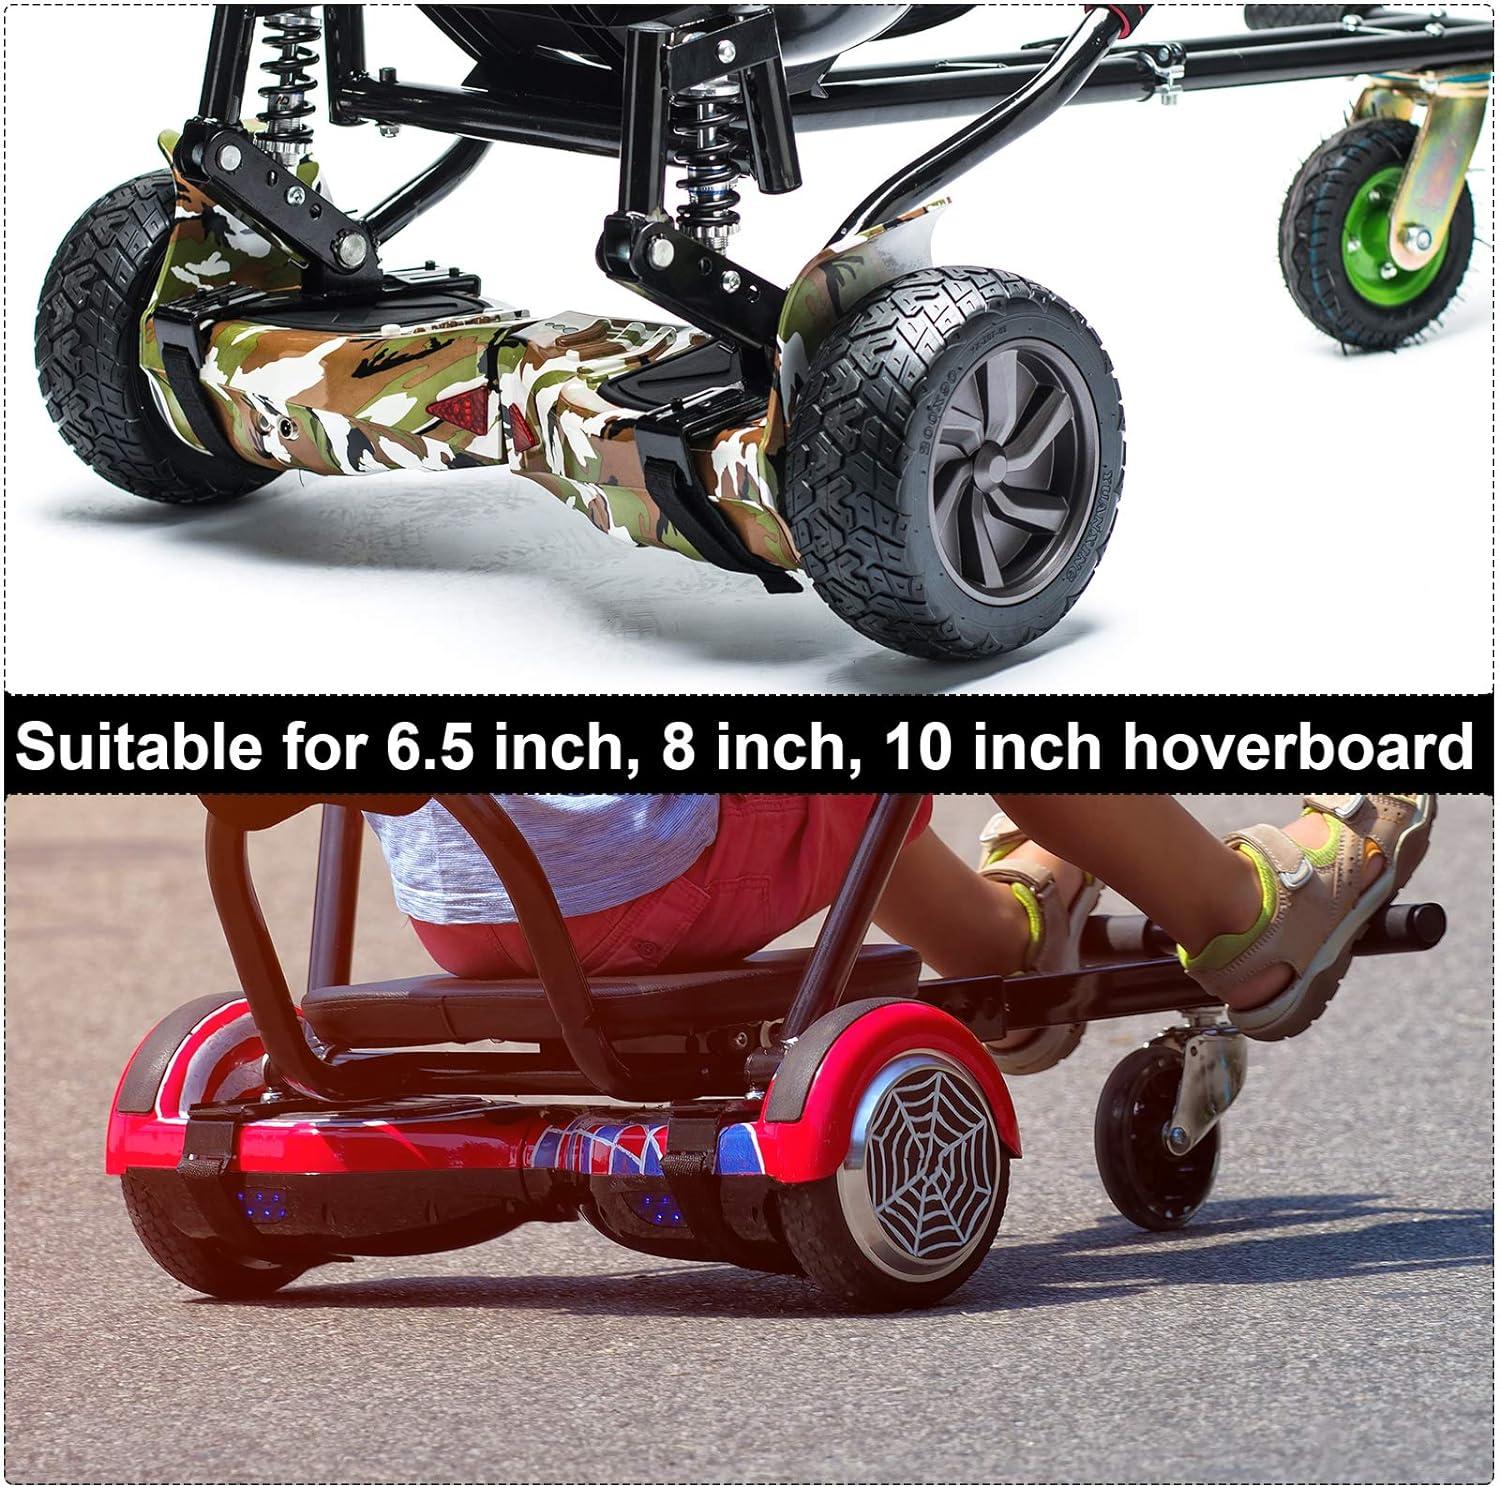 How to attach hoverkart straps to the Hoverkart Hoverboard